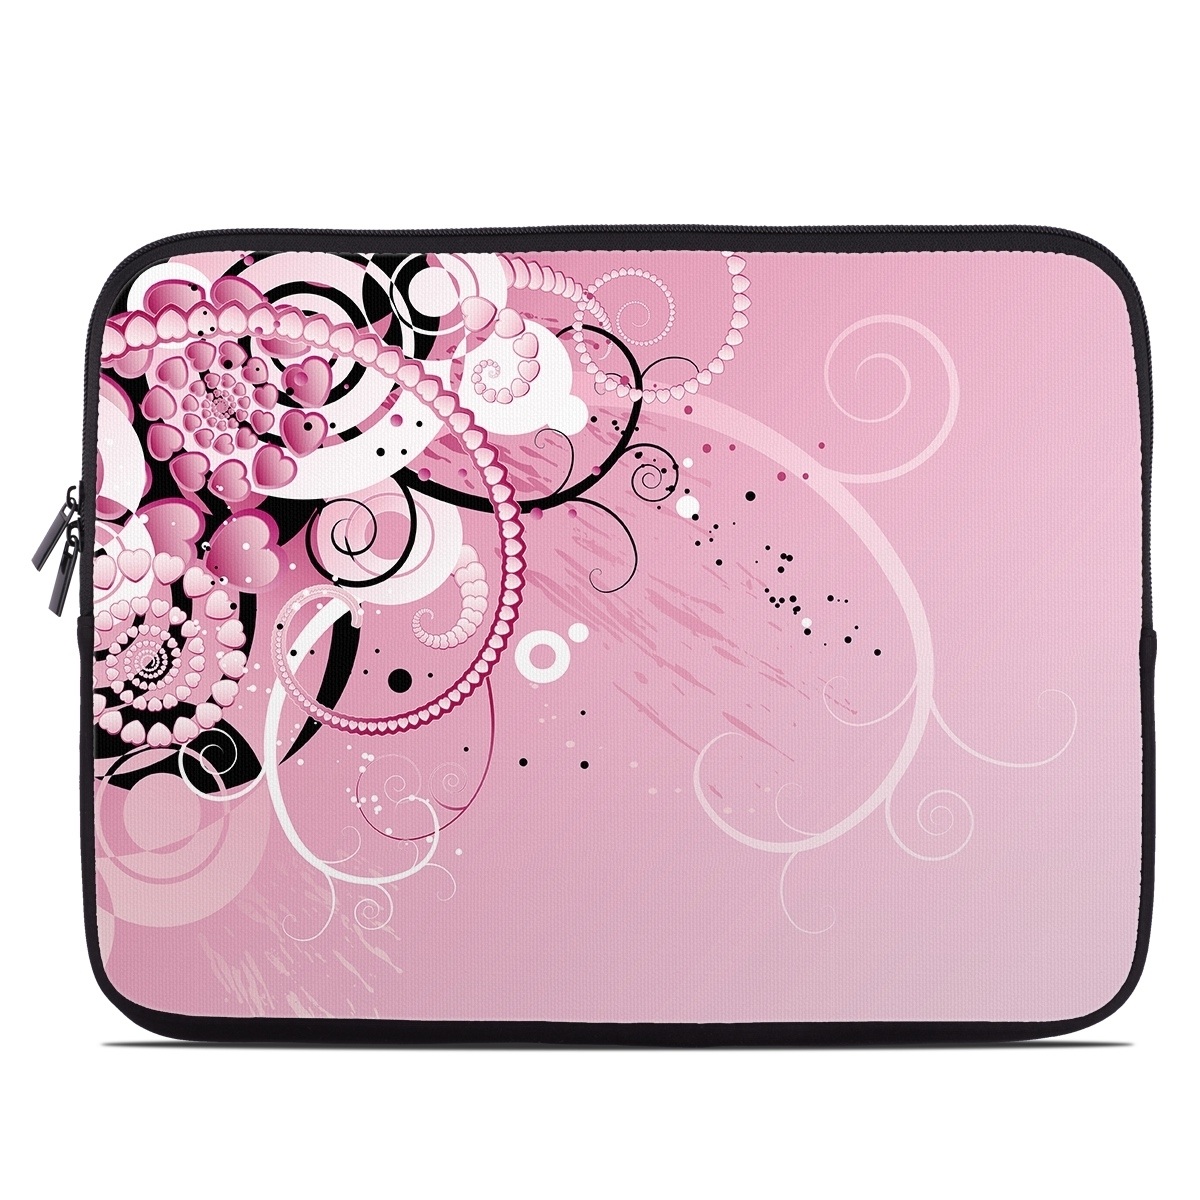 Laptop Sleeve - Her Abstraction (Image 1)